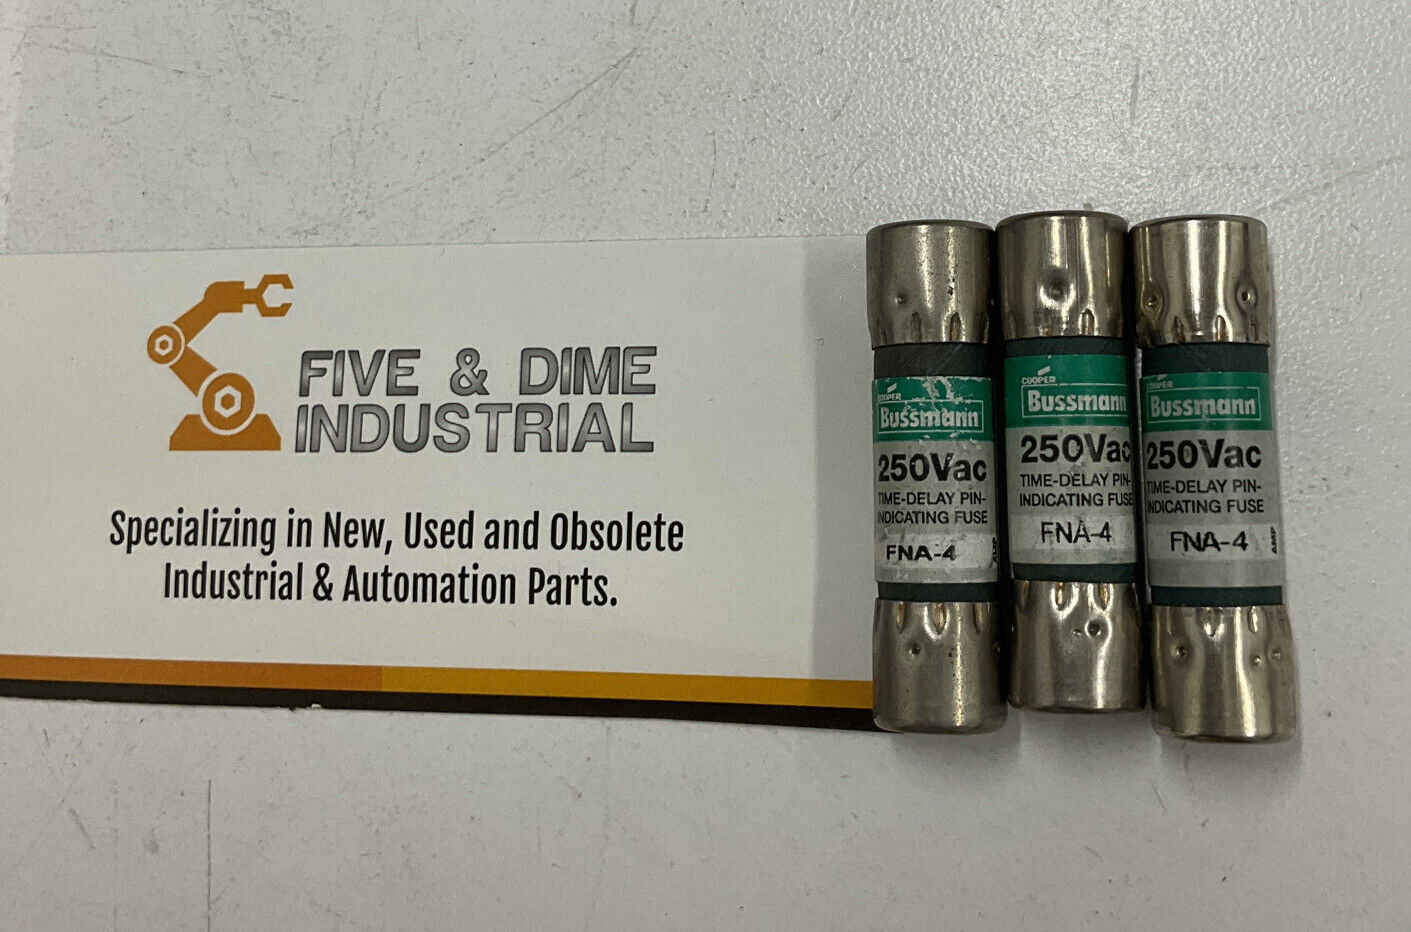 Bussmann FNA-4 Lot of 3 Time-Delay Indicating Fuses 250VAC (YE130) - 0